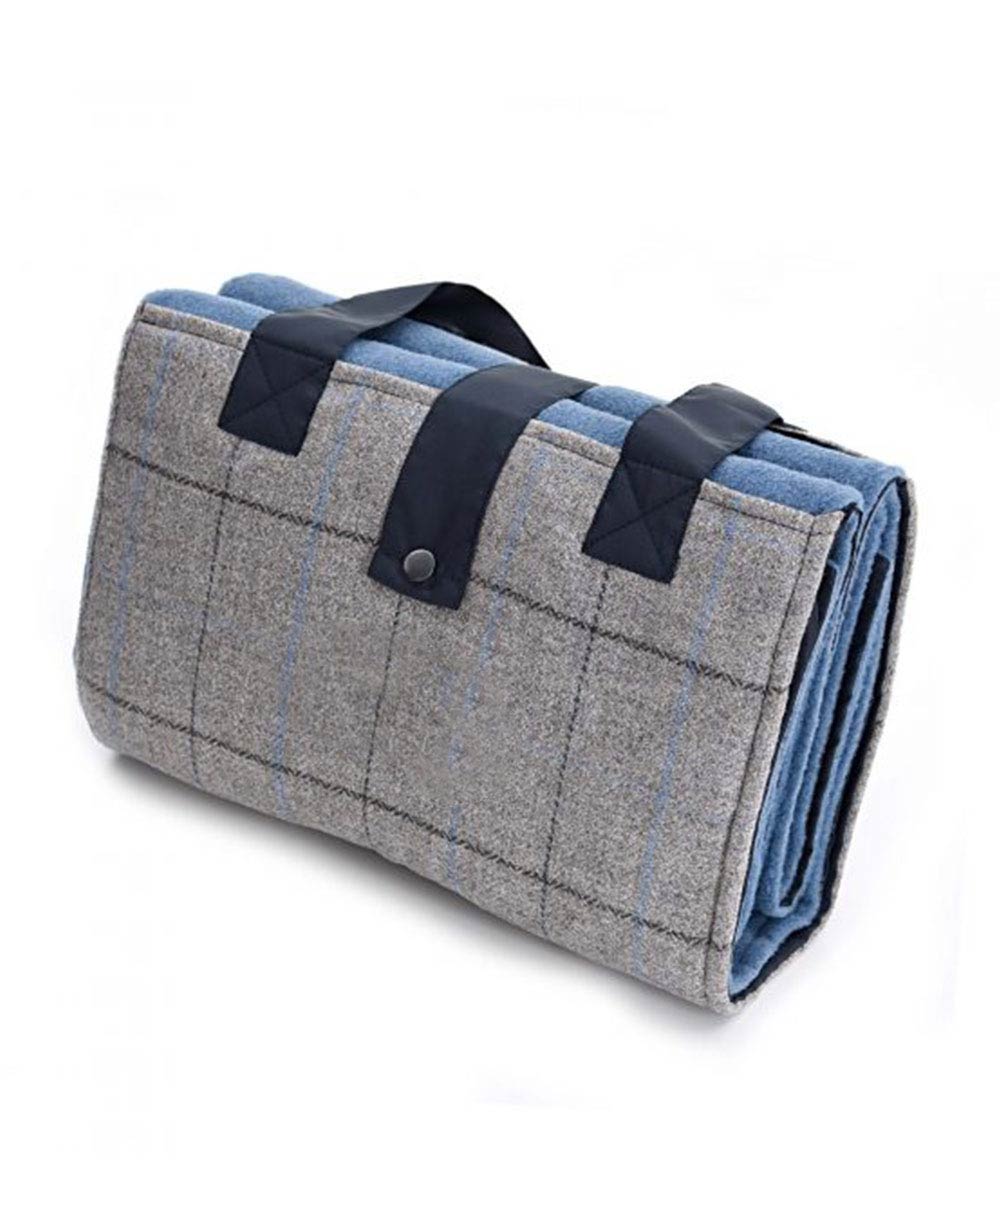 Goodwood Chequered Travel Picnic Rug in Blue and Silver